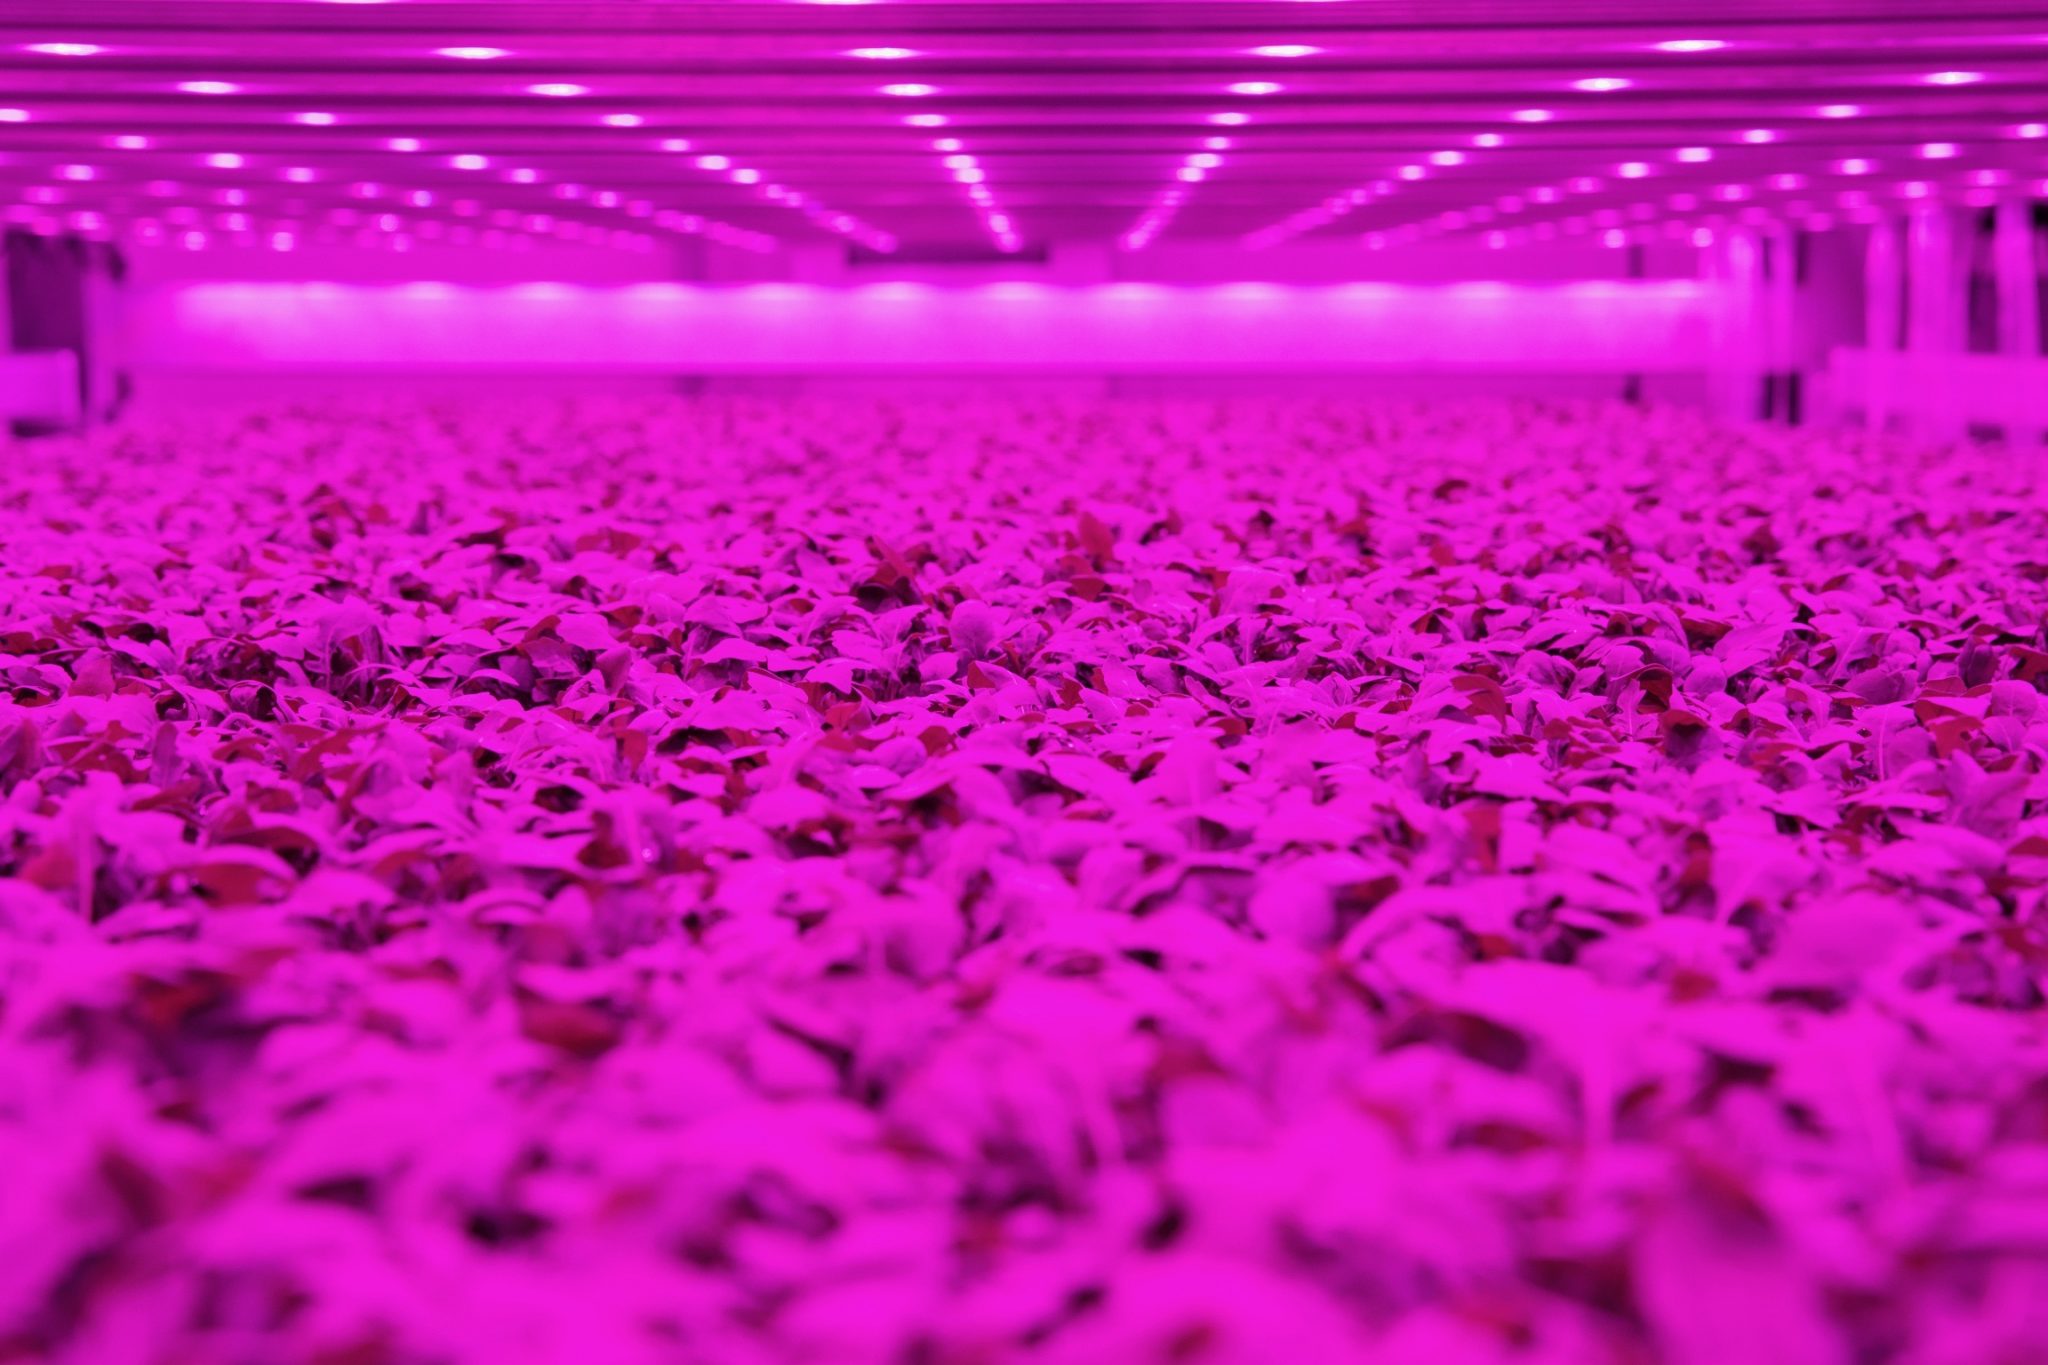 salad leave growing in pink light